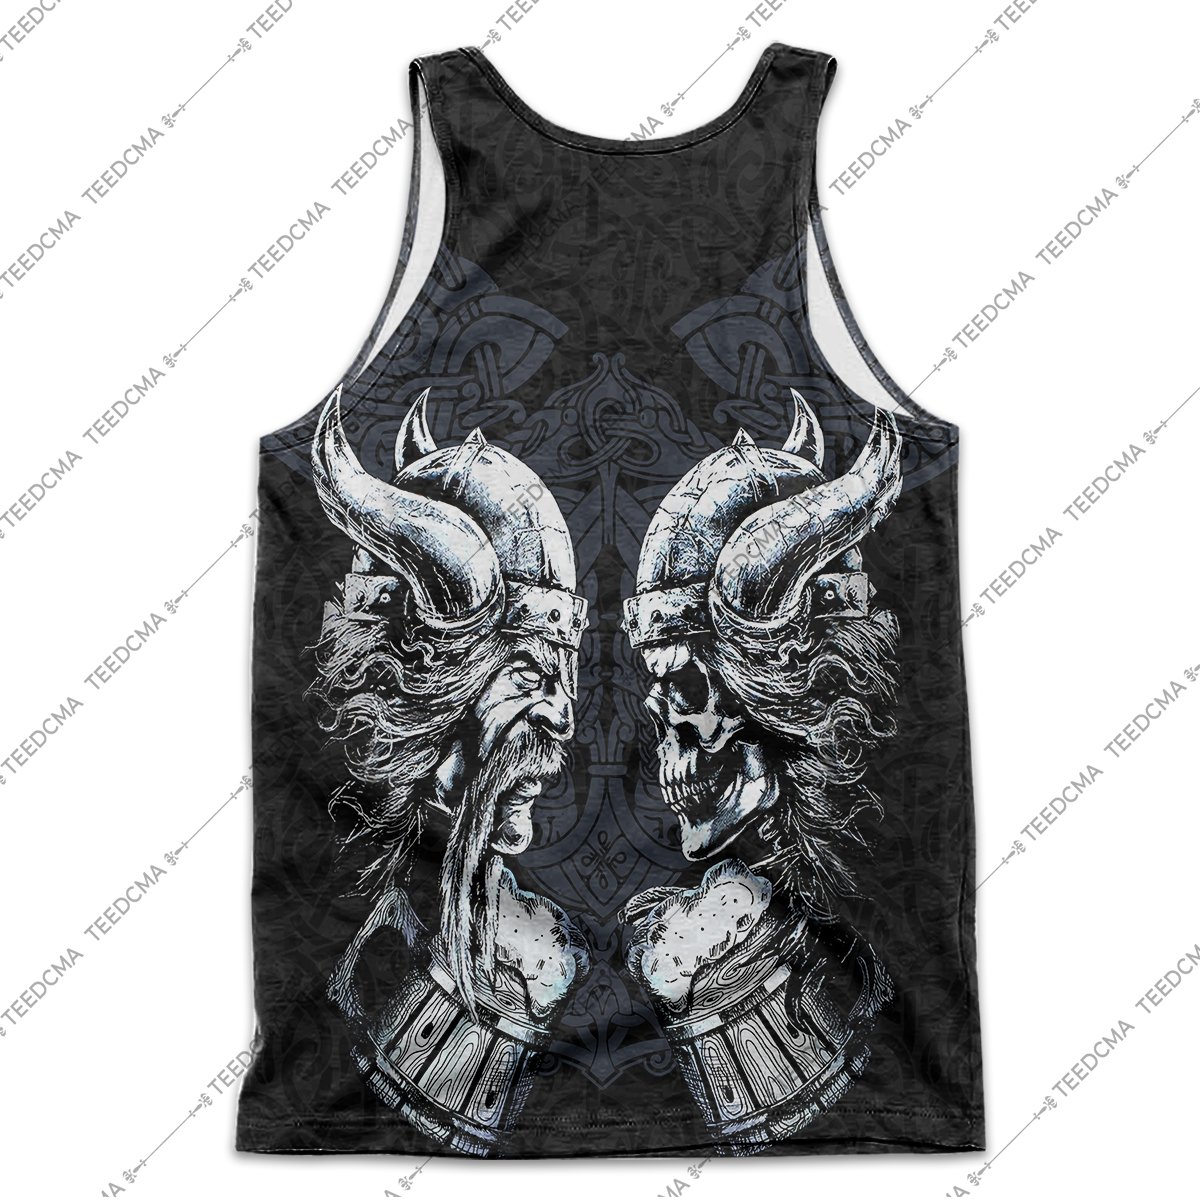 the skull and warrior viking all over printed tank top - back